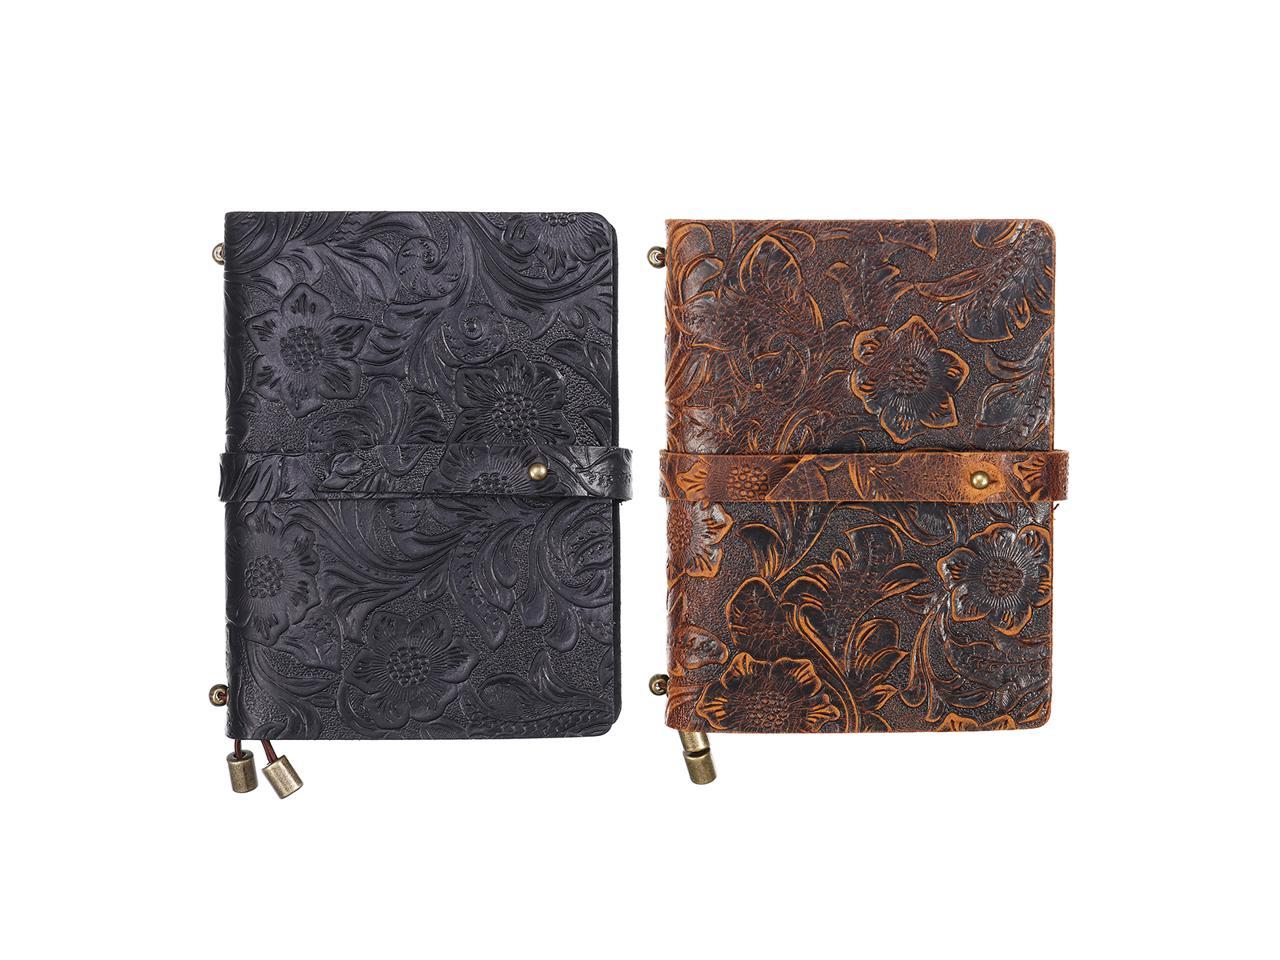 Clasp Indra Handmade Medium Embossed Stitched Leather Diary Notebook Journal 